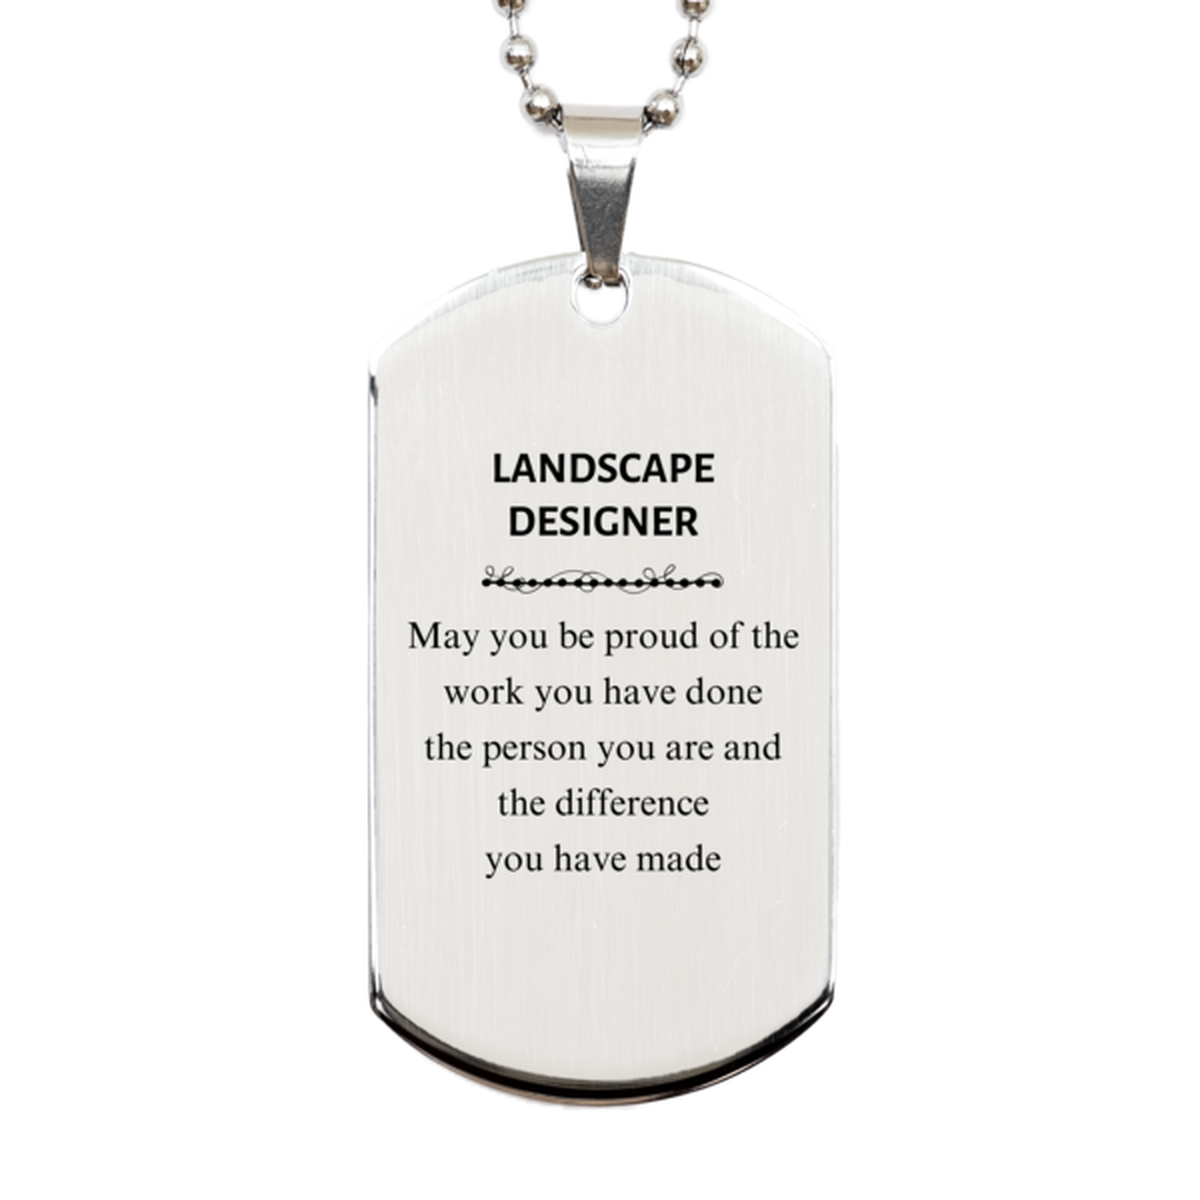 Landscape Designer May you be proud of the work you have done, Retirement Landscape Designer Silver Dog Tag for Colleague Appreciation Gifts Amazing for Landscape Designer